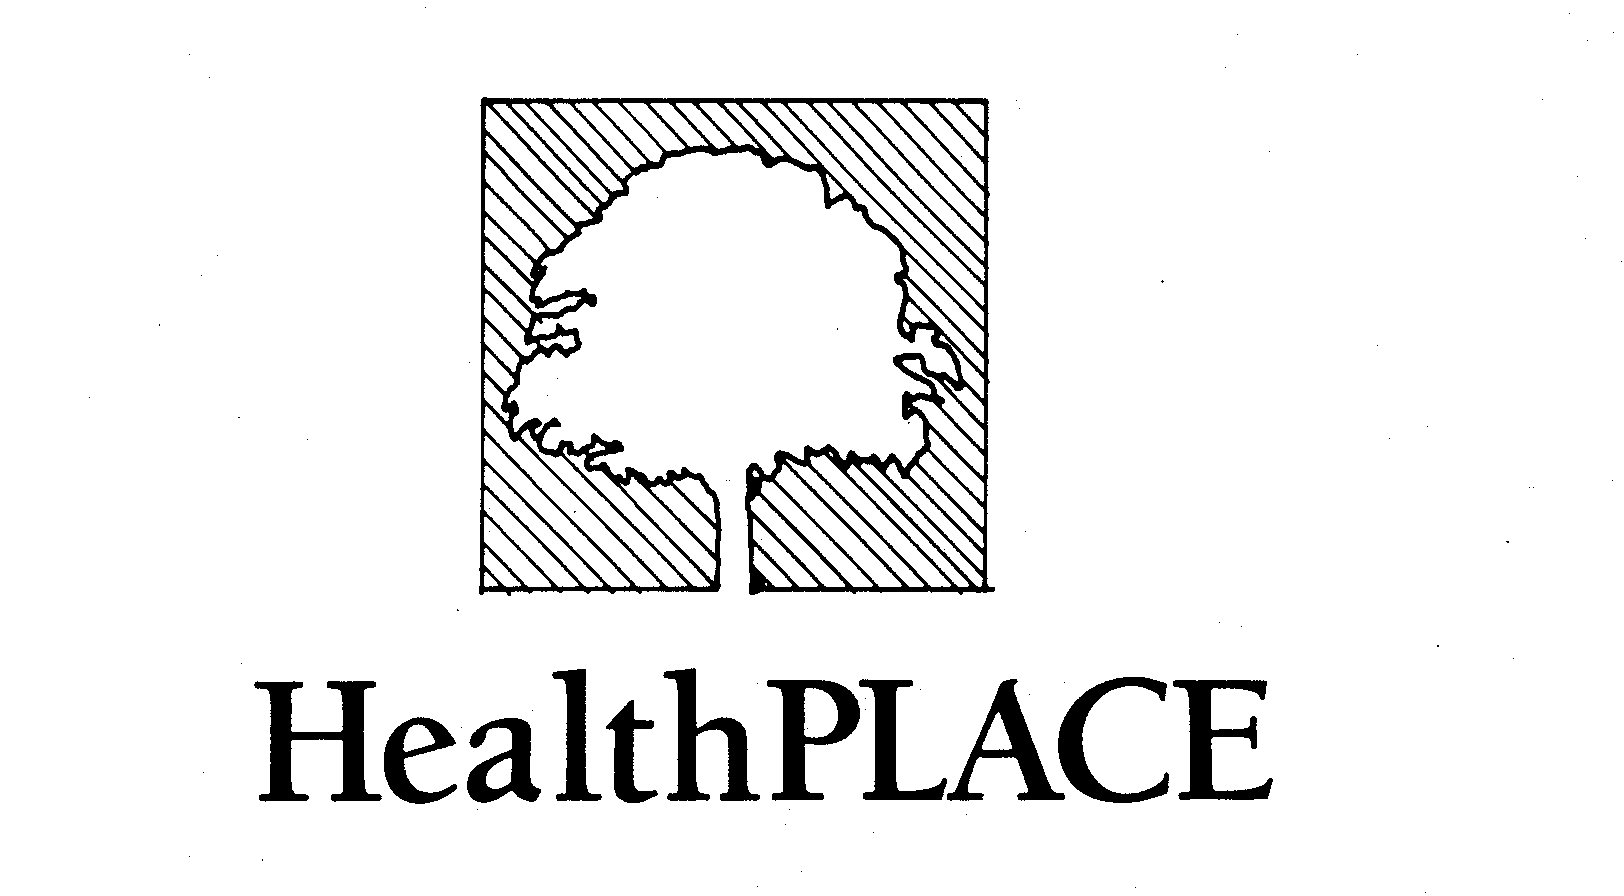 HEALTH PLACE